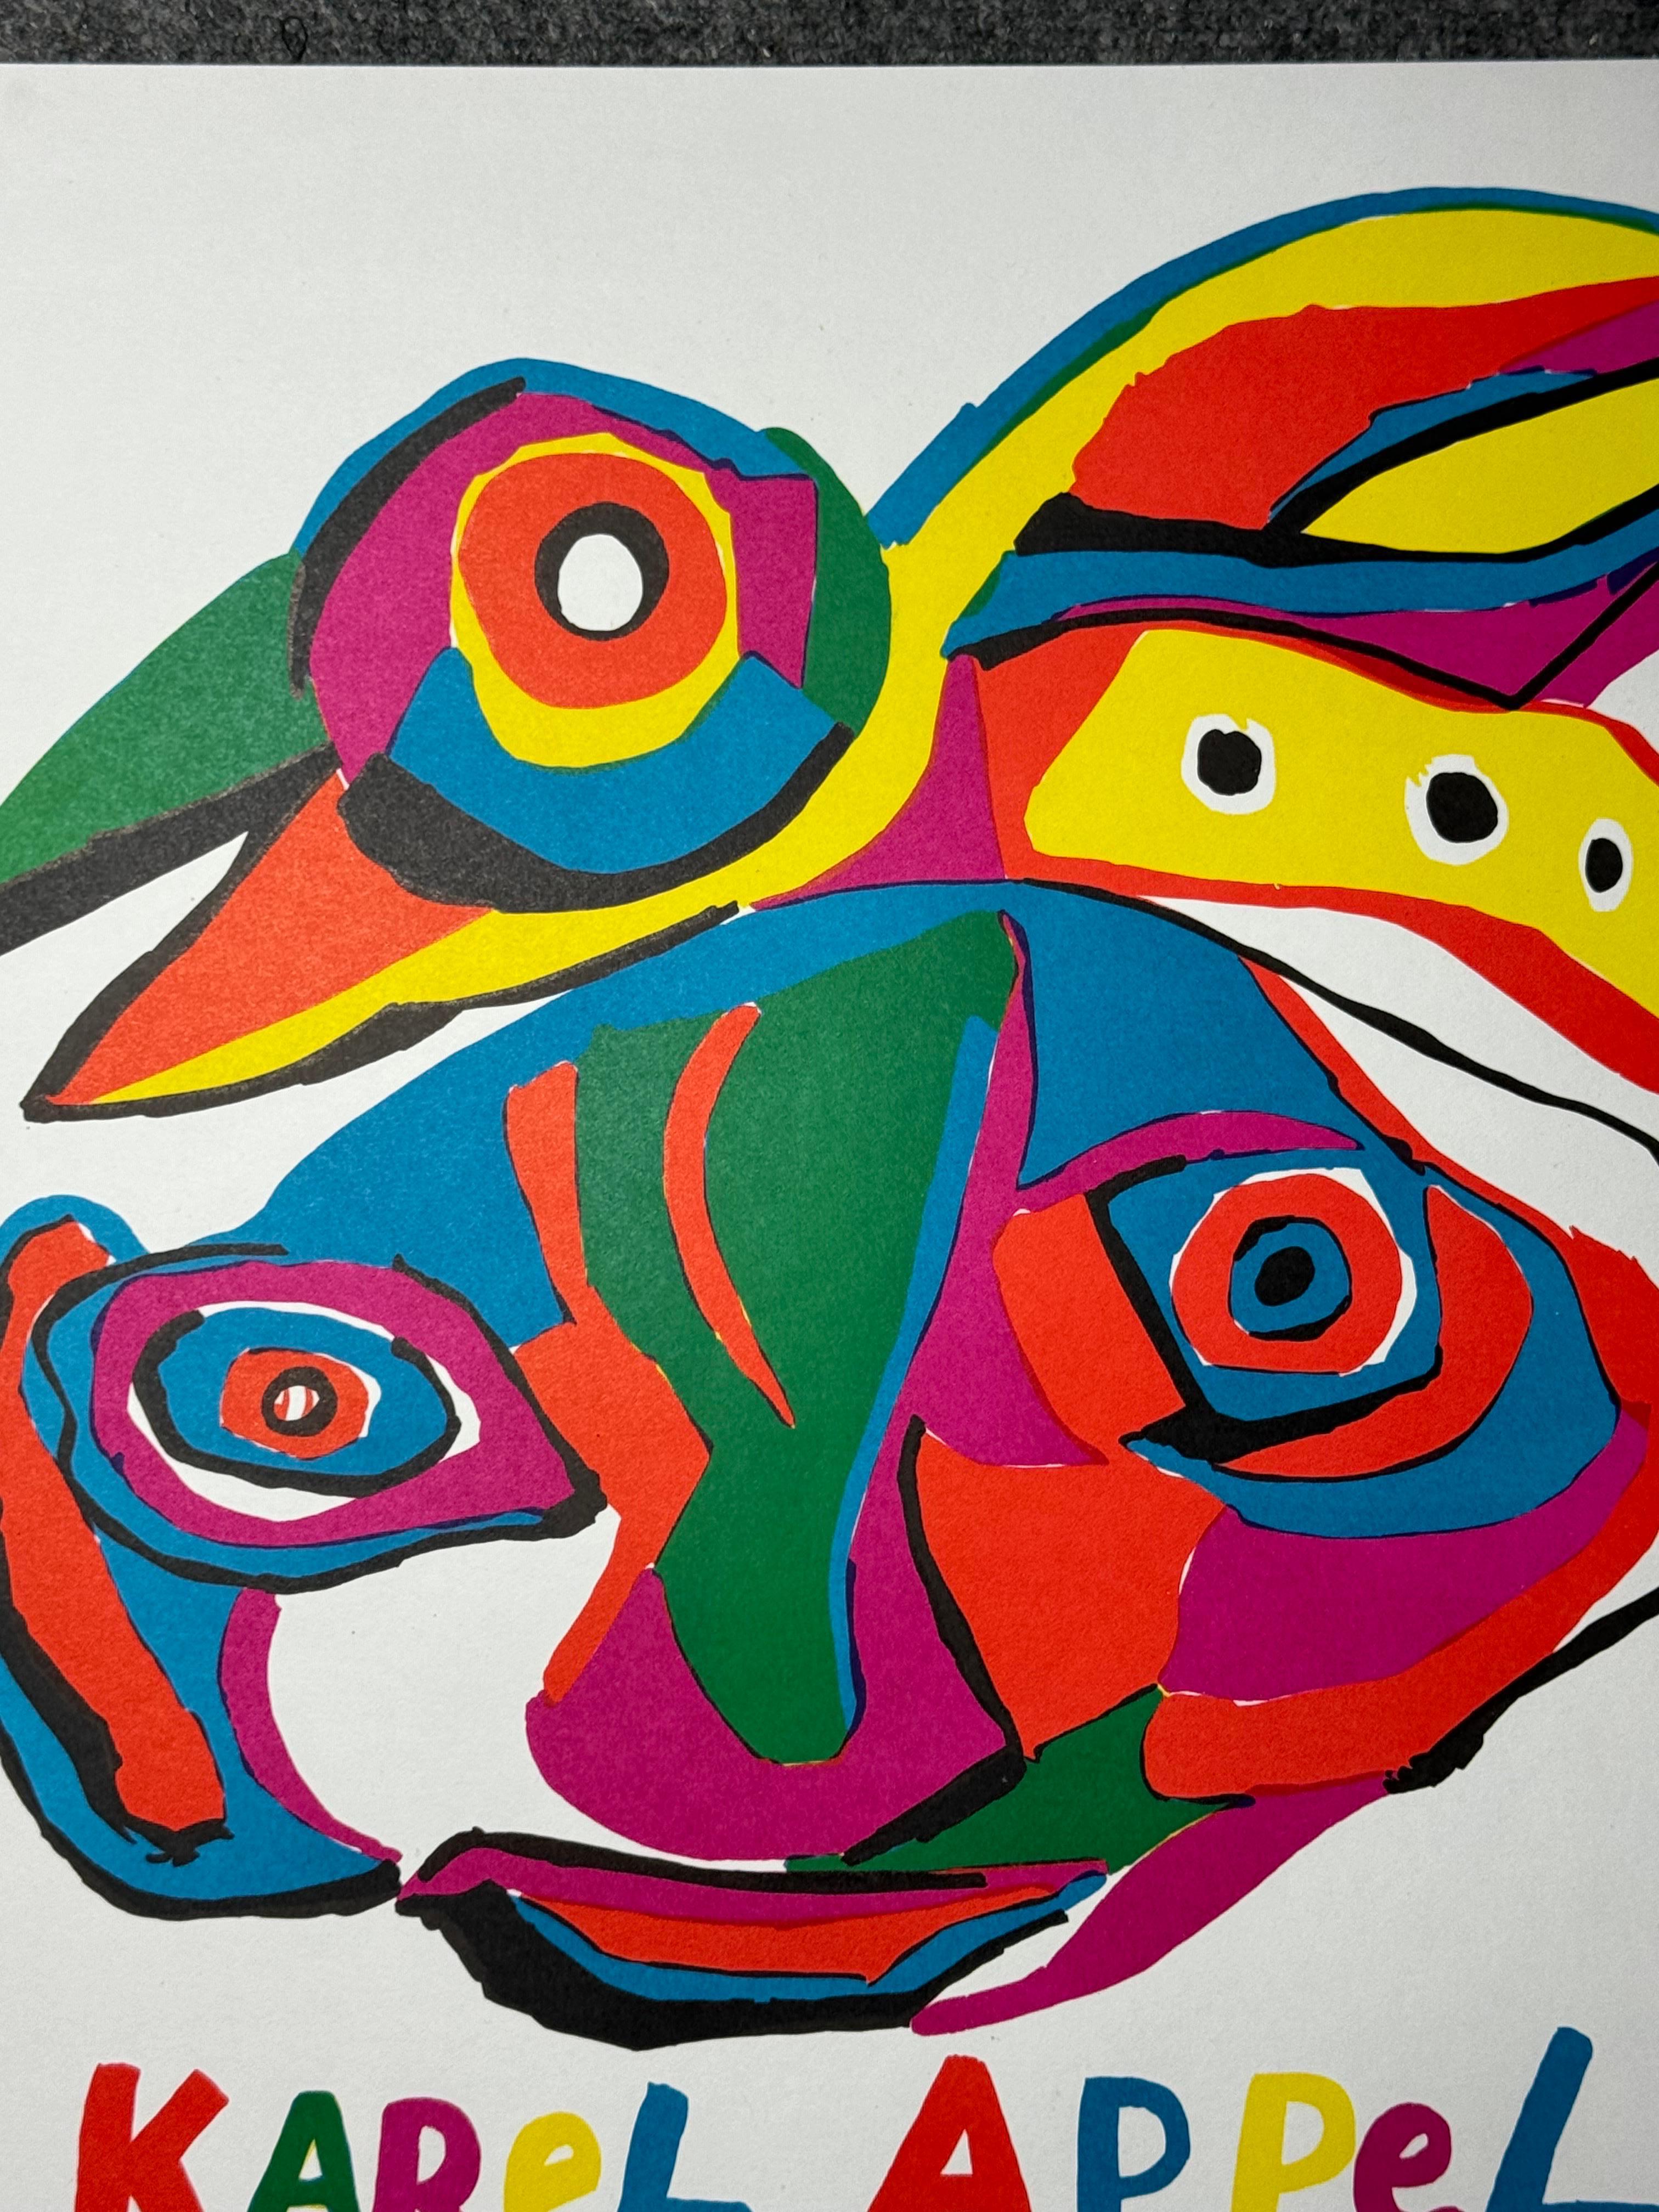 Gorgeous lithograph after Karel Appel for an exhibition in the London Arts Gallery circa 1969. This print is marked 